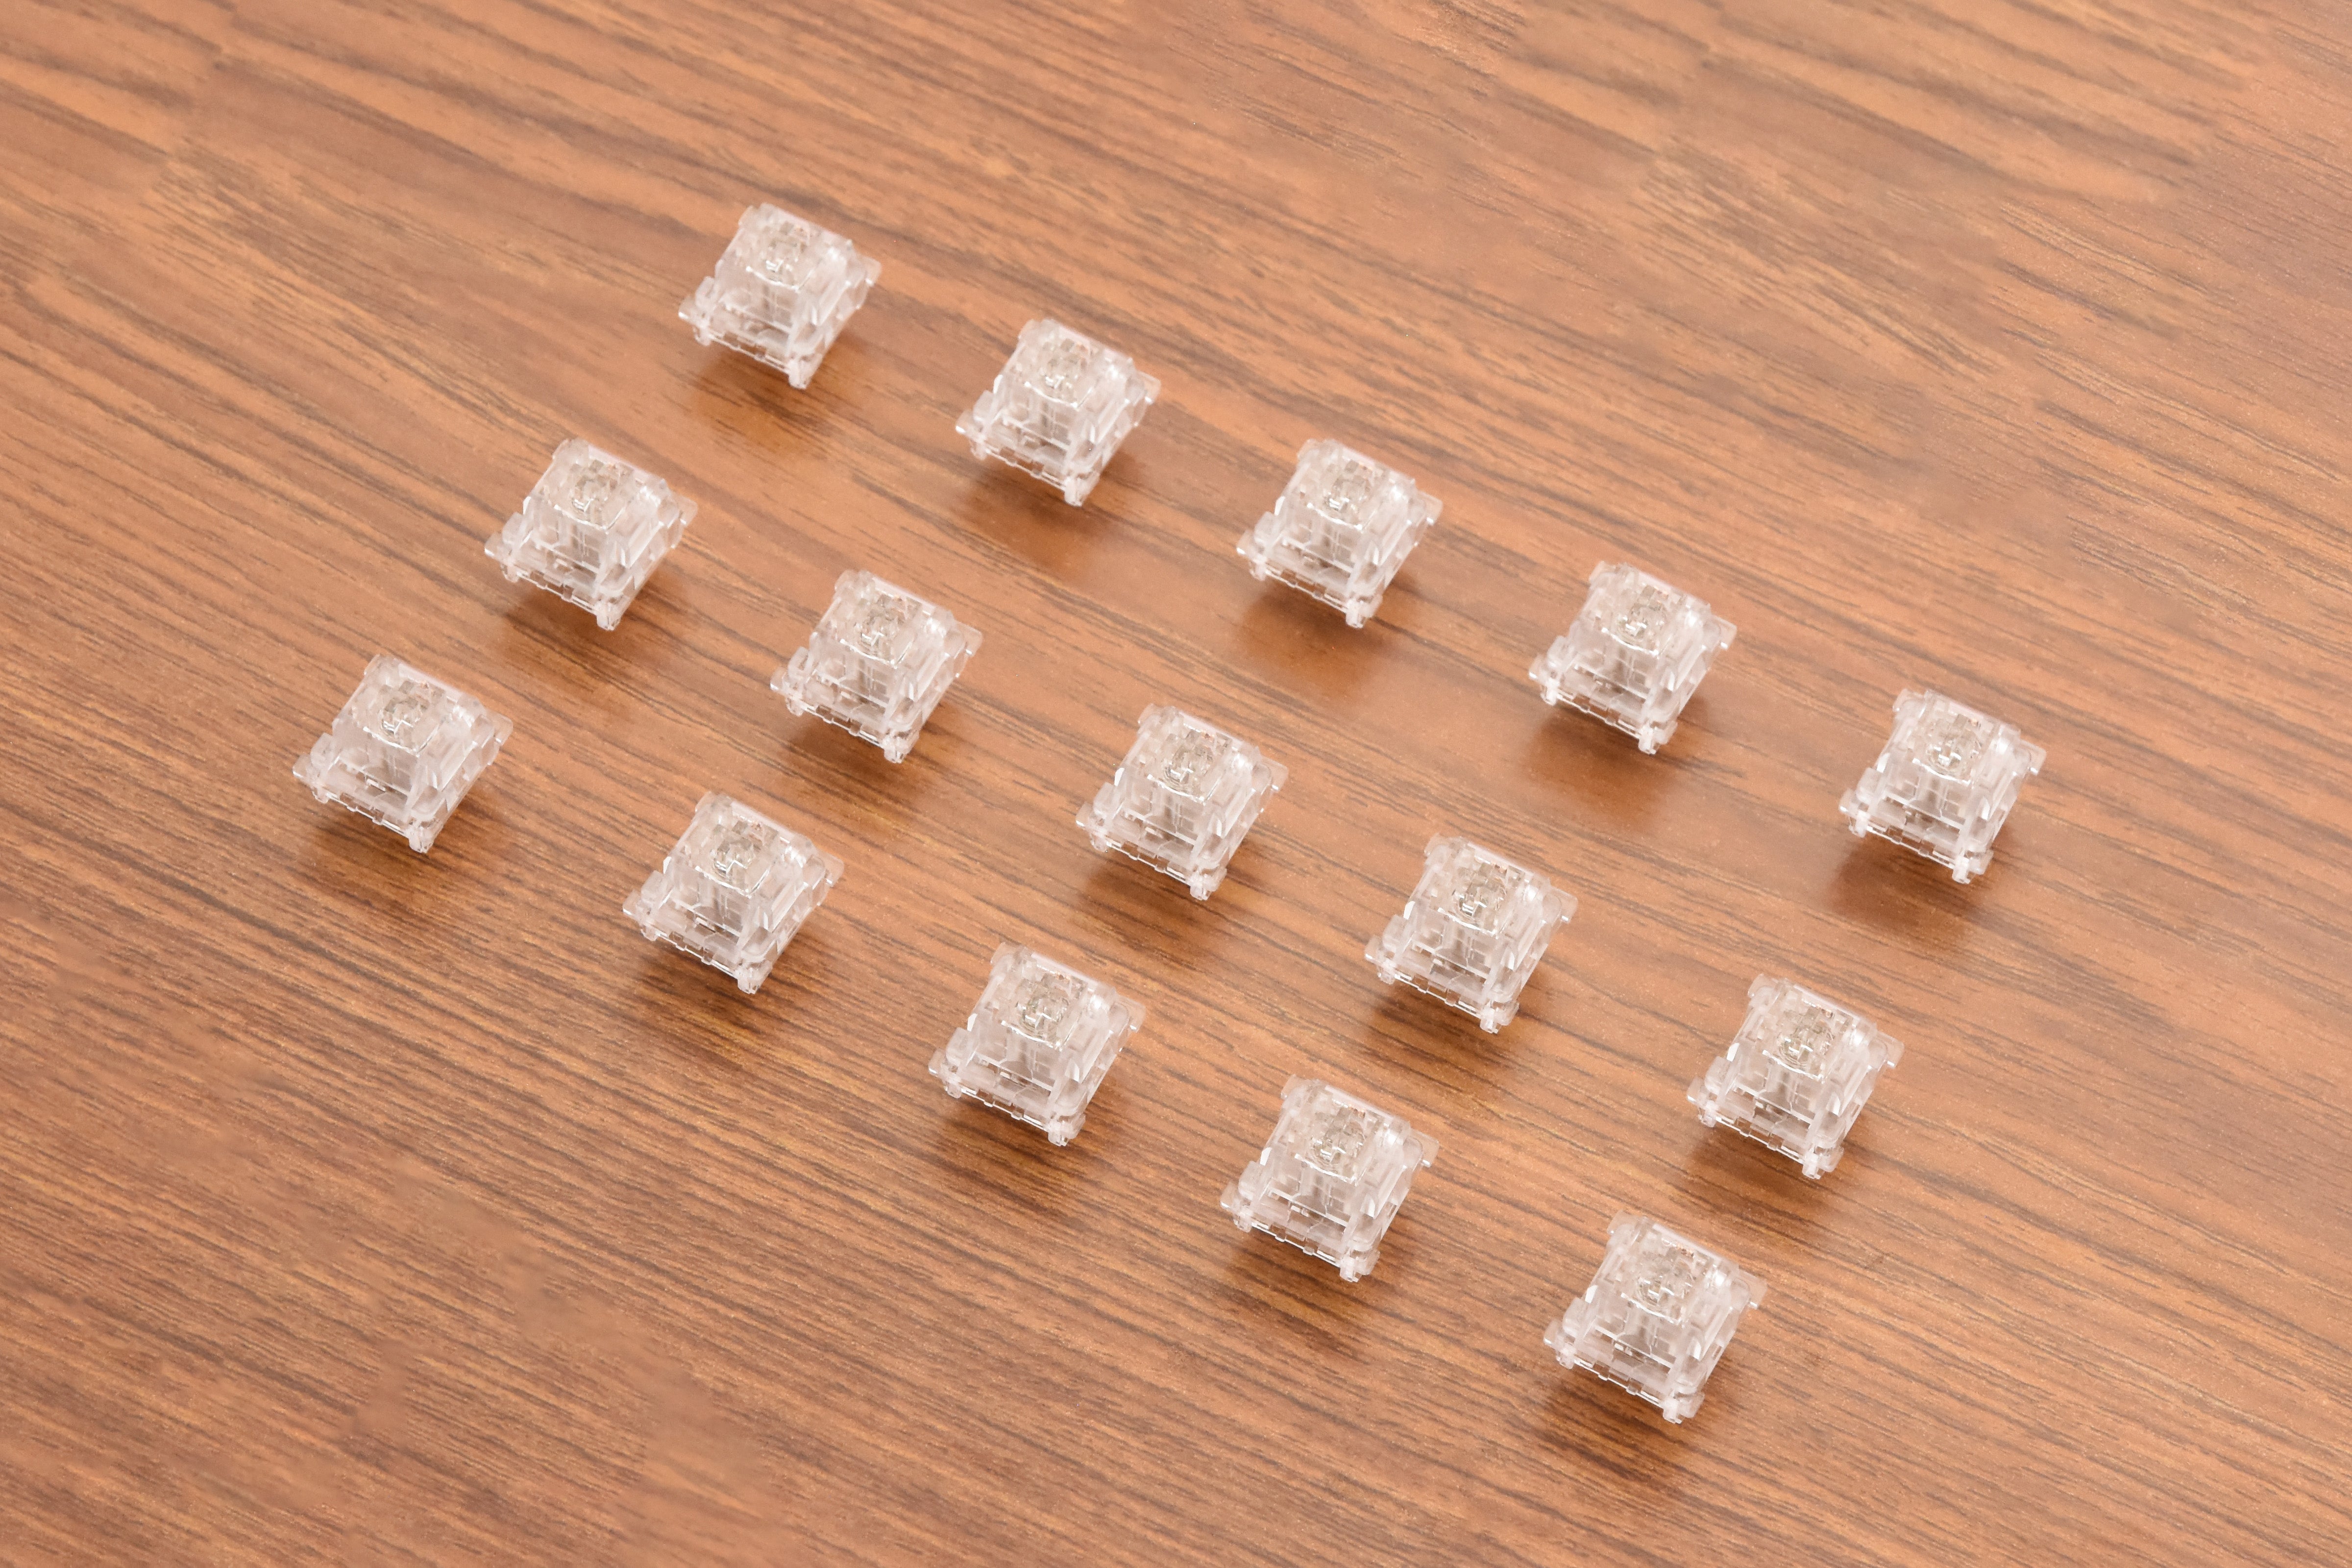 AKKO V3 CRYSTAL PRO SWITCH FACTORY LUBED EDITION (10PCS)